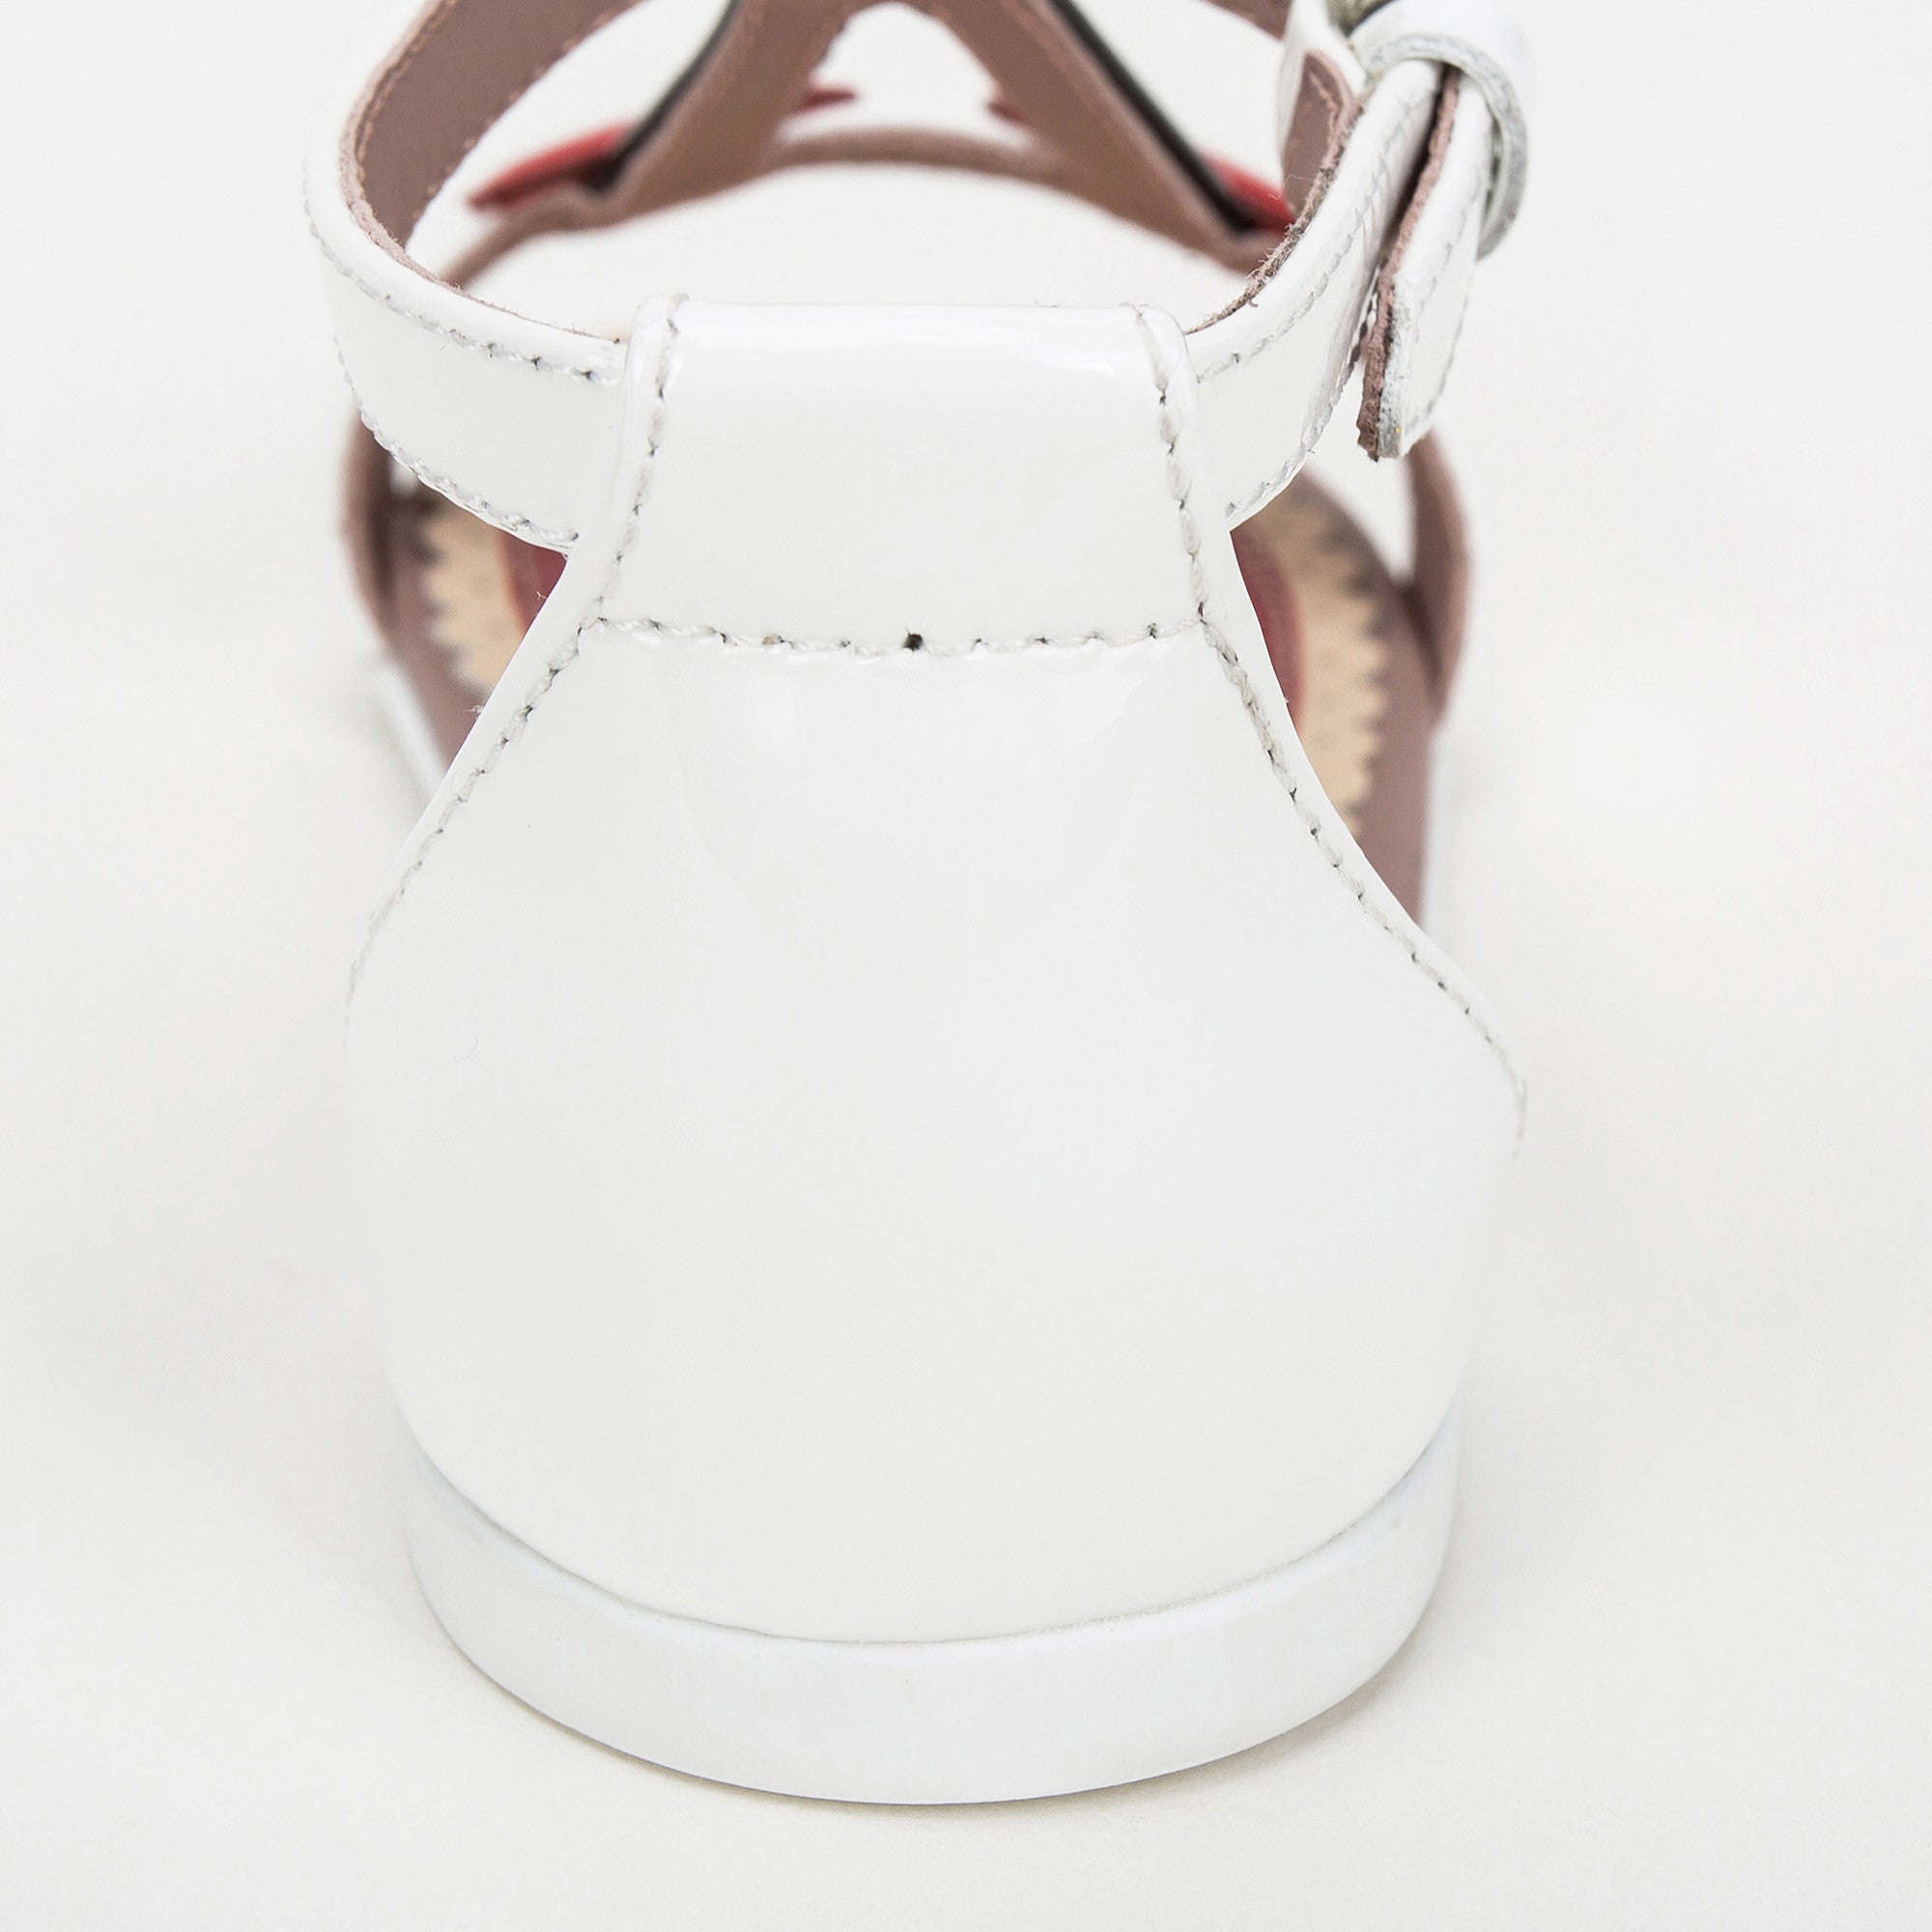 Girls White Patent Leather Sandals